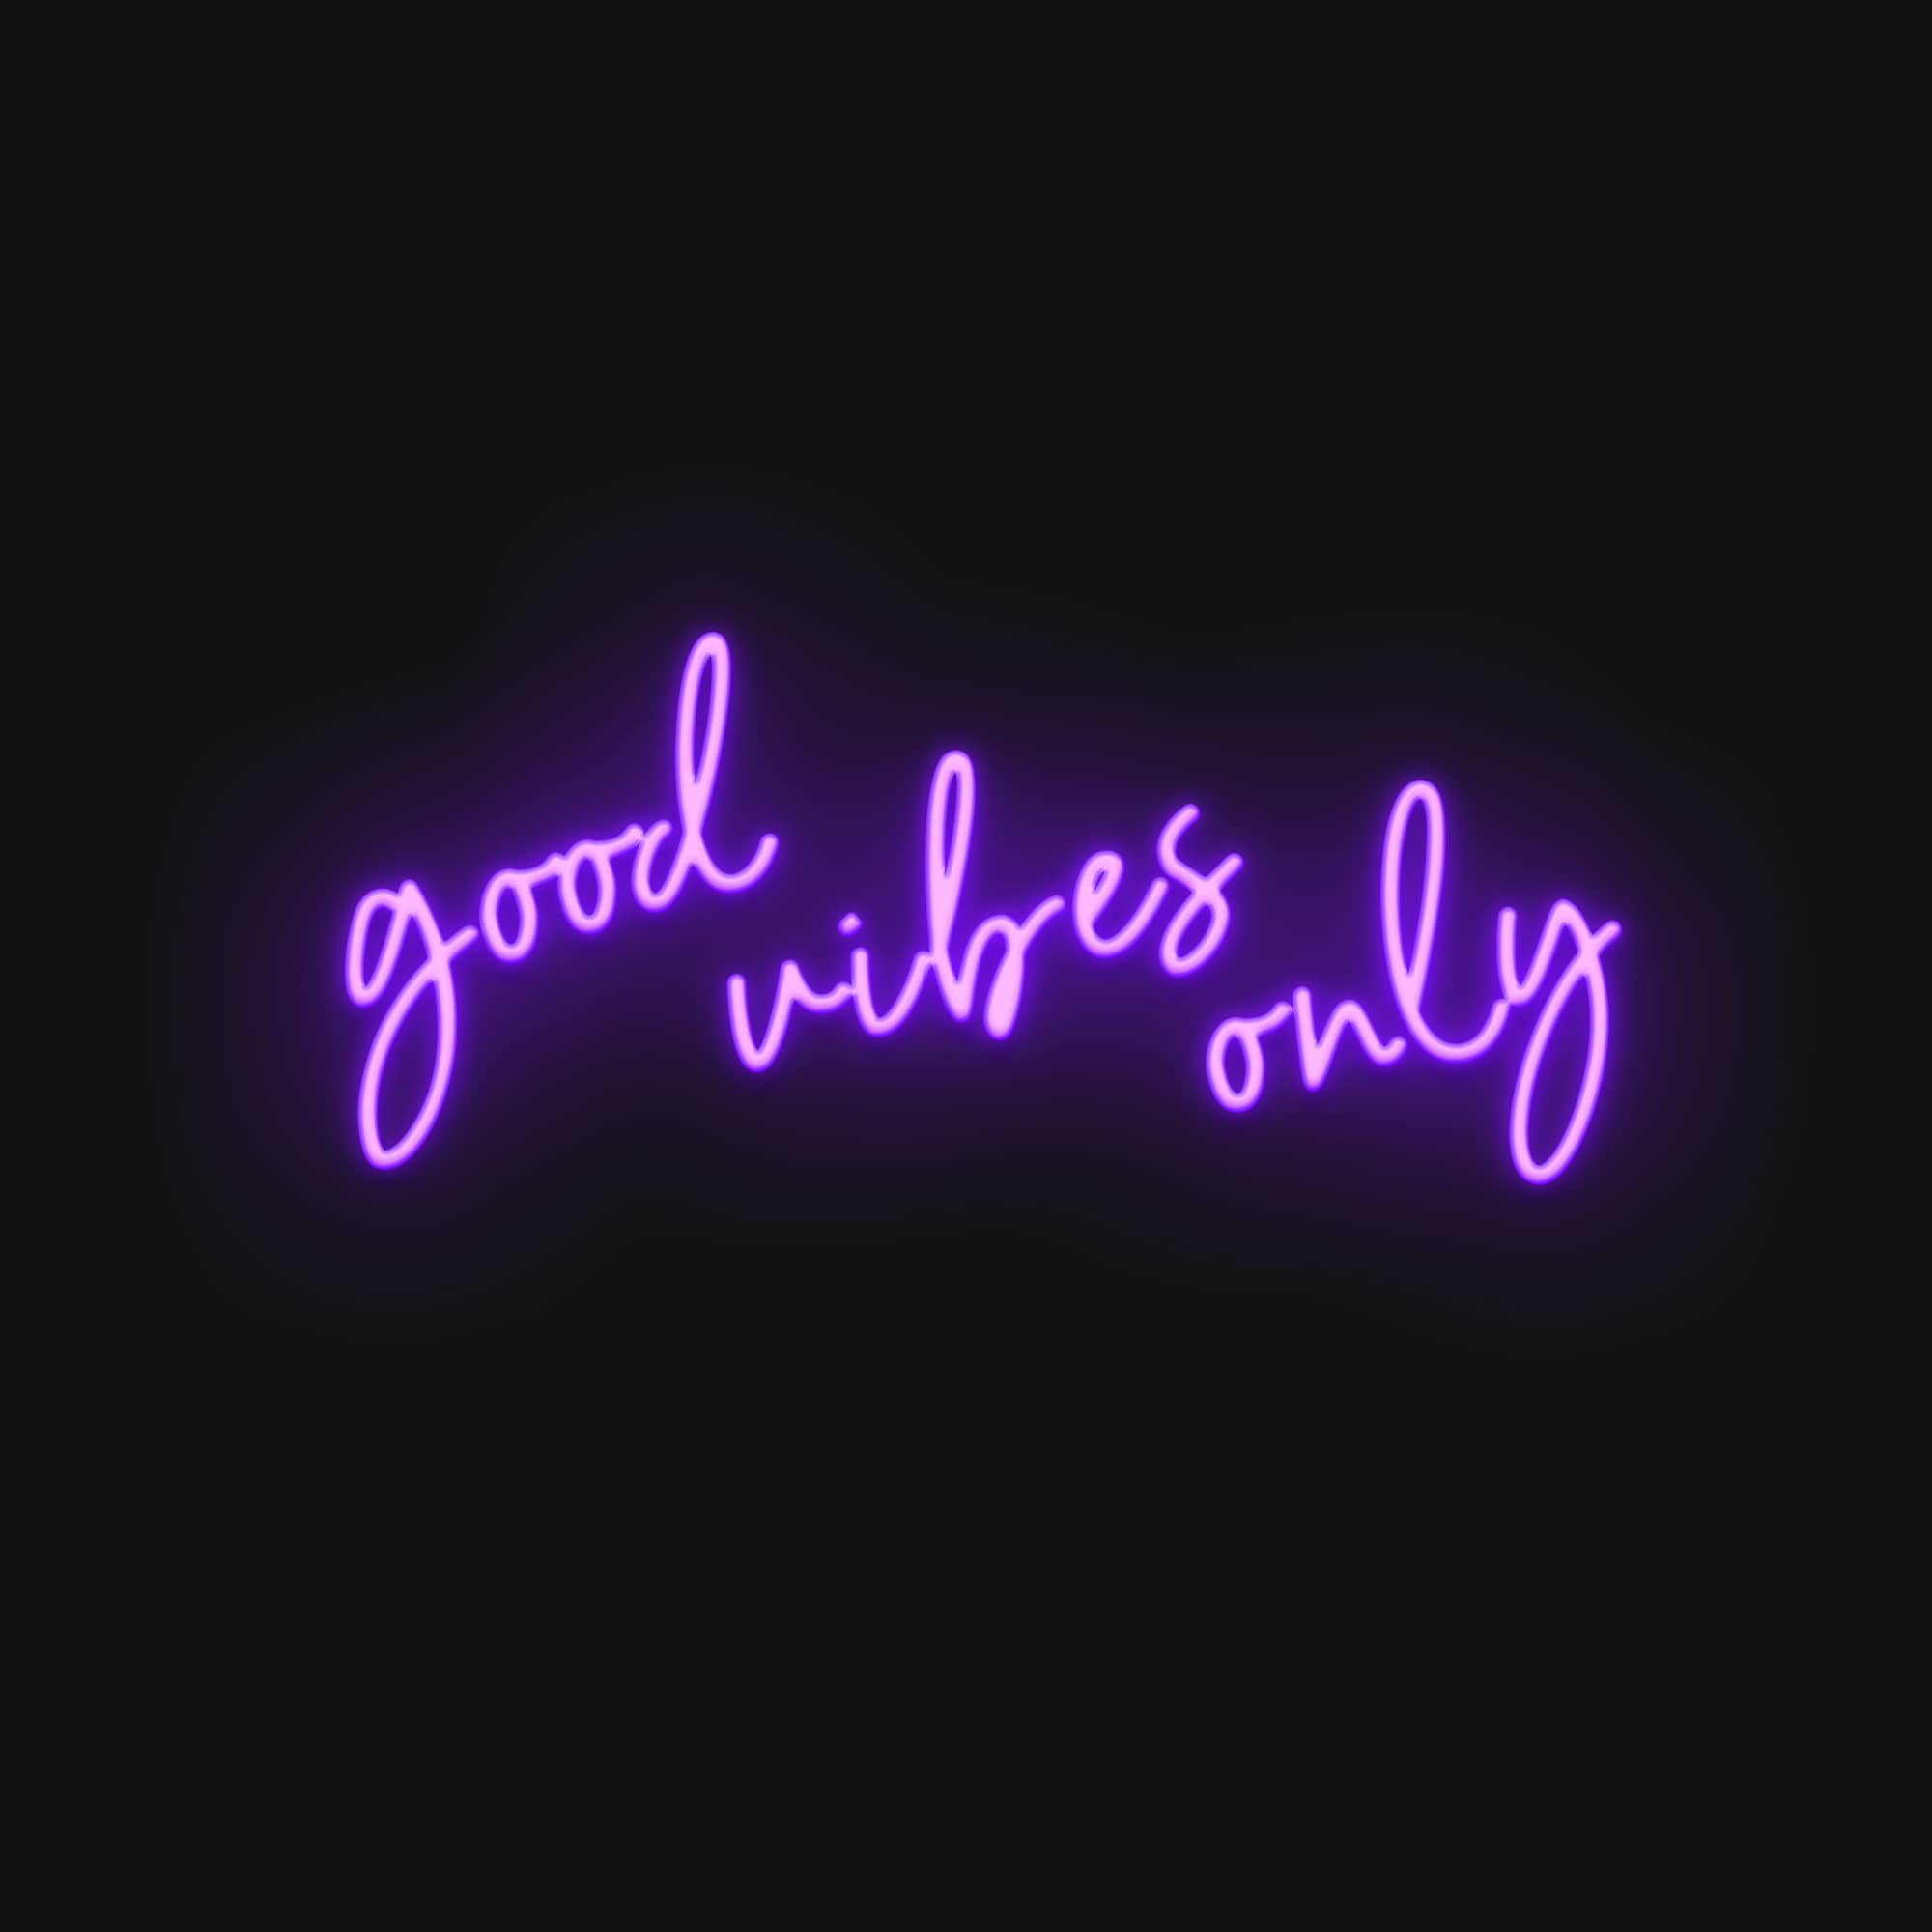 Good Vibes Only - Ecriture Led